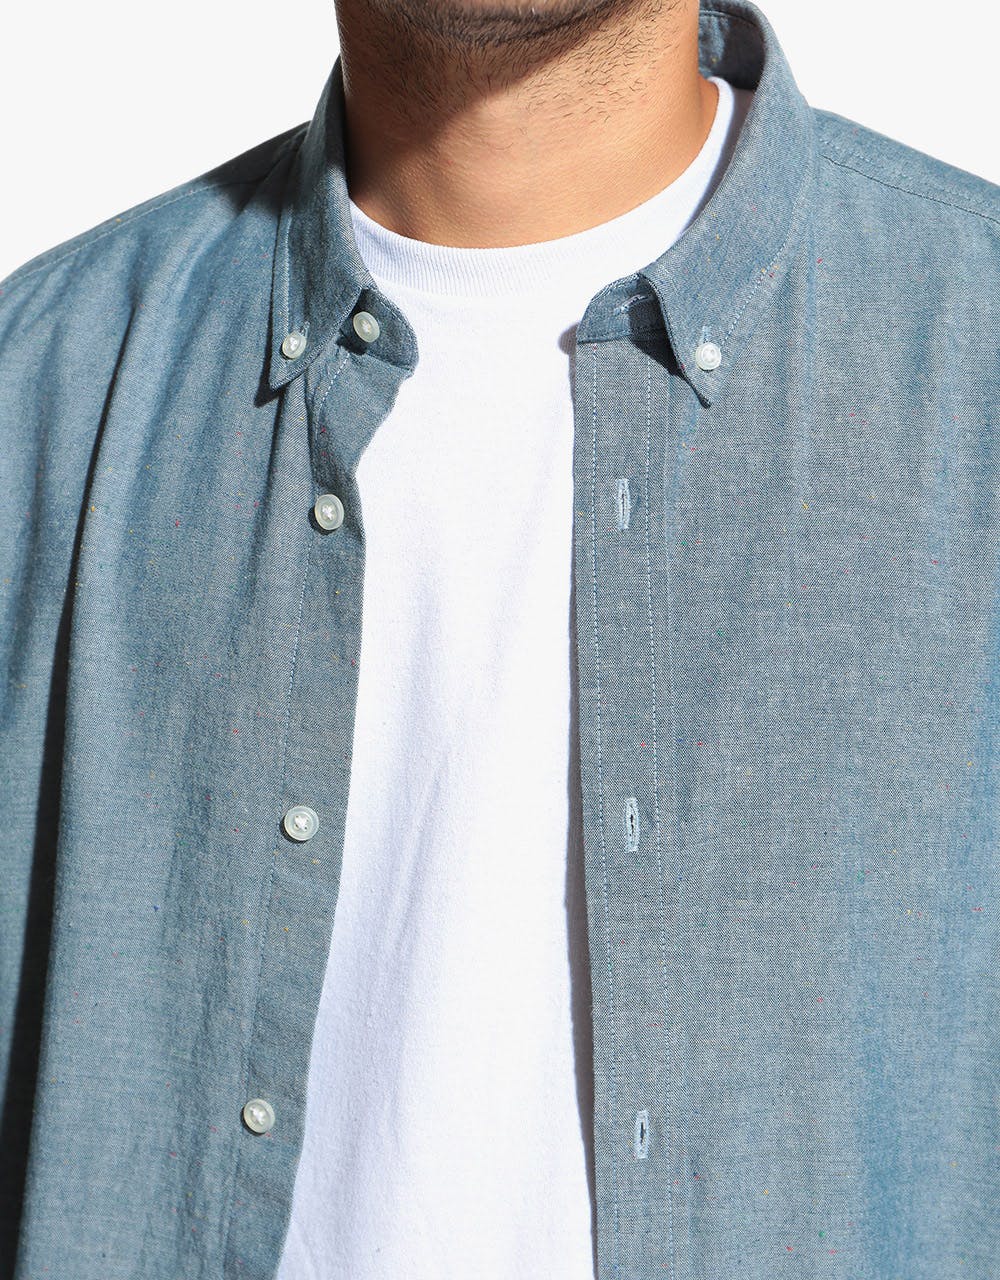 Carhartt WIP L/S Kyoto Shirt - Blue Stone Washed